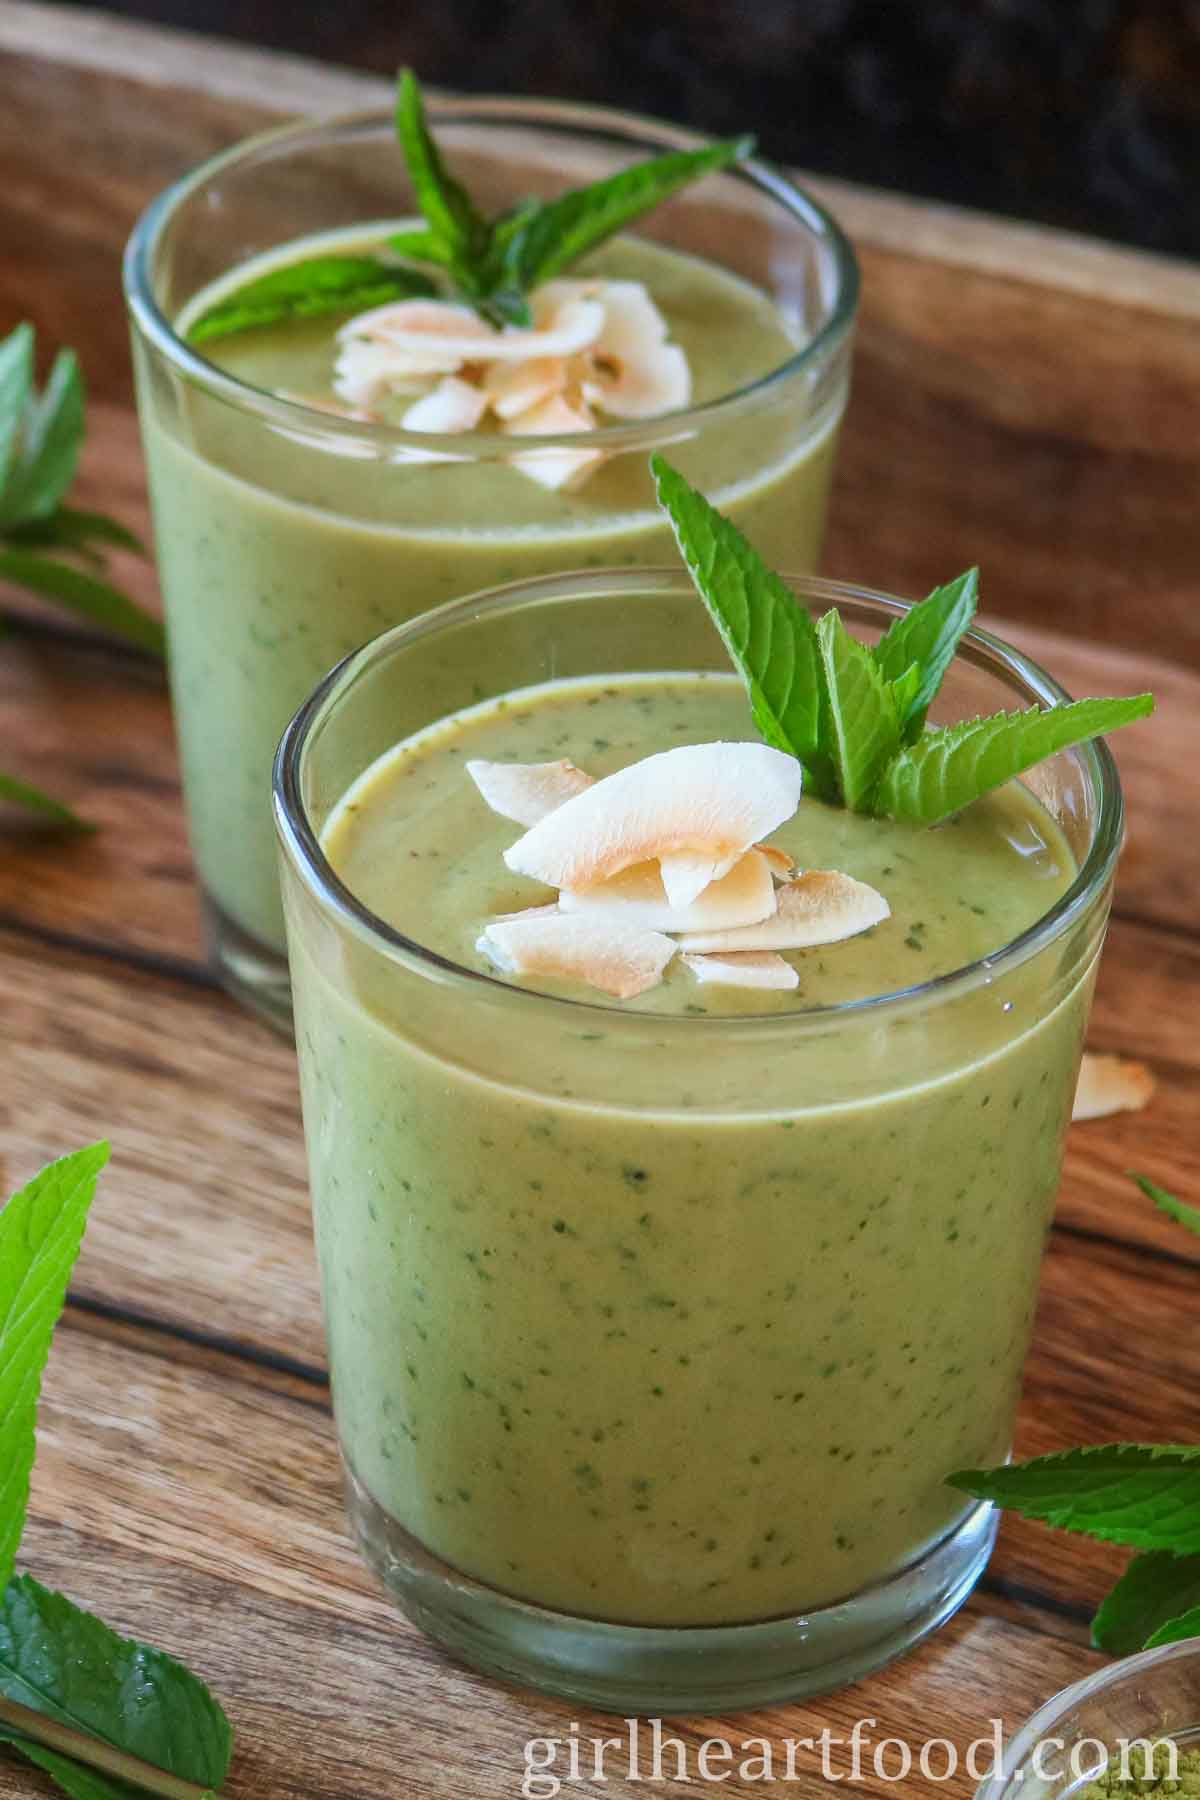 Two glasses of matcha smoothie, one in front of the other, each garnished with mint and coconut.